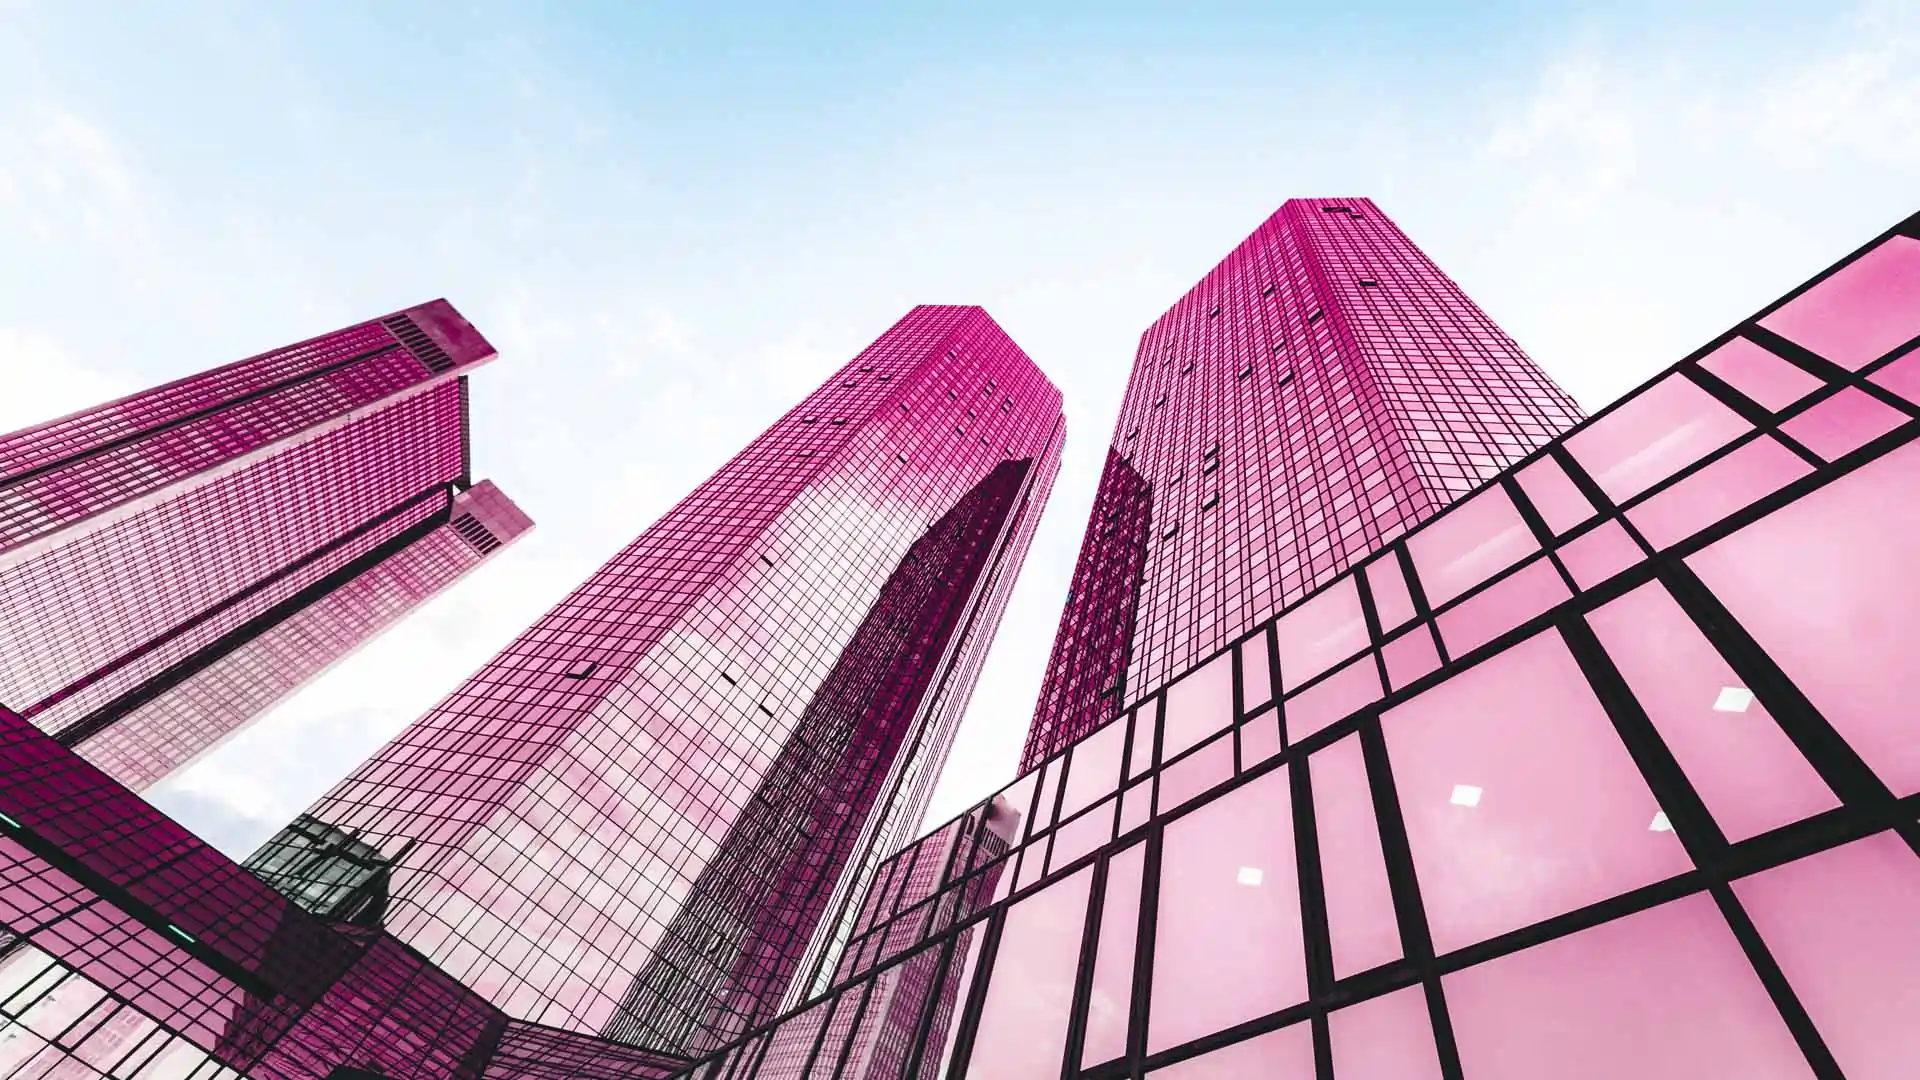 Tall pink skyscrapers.